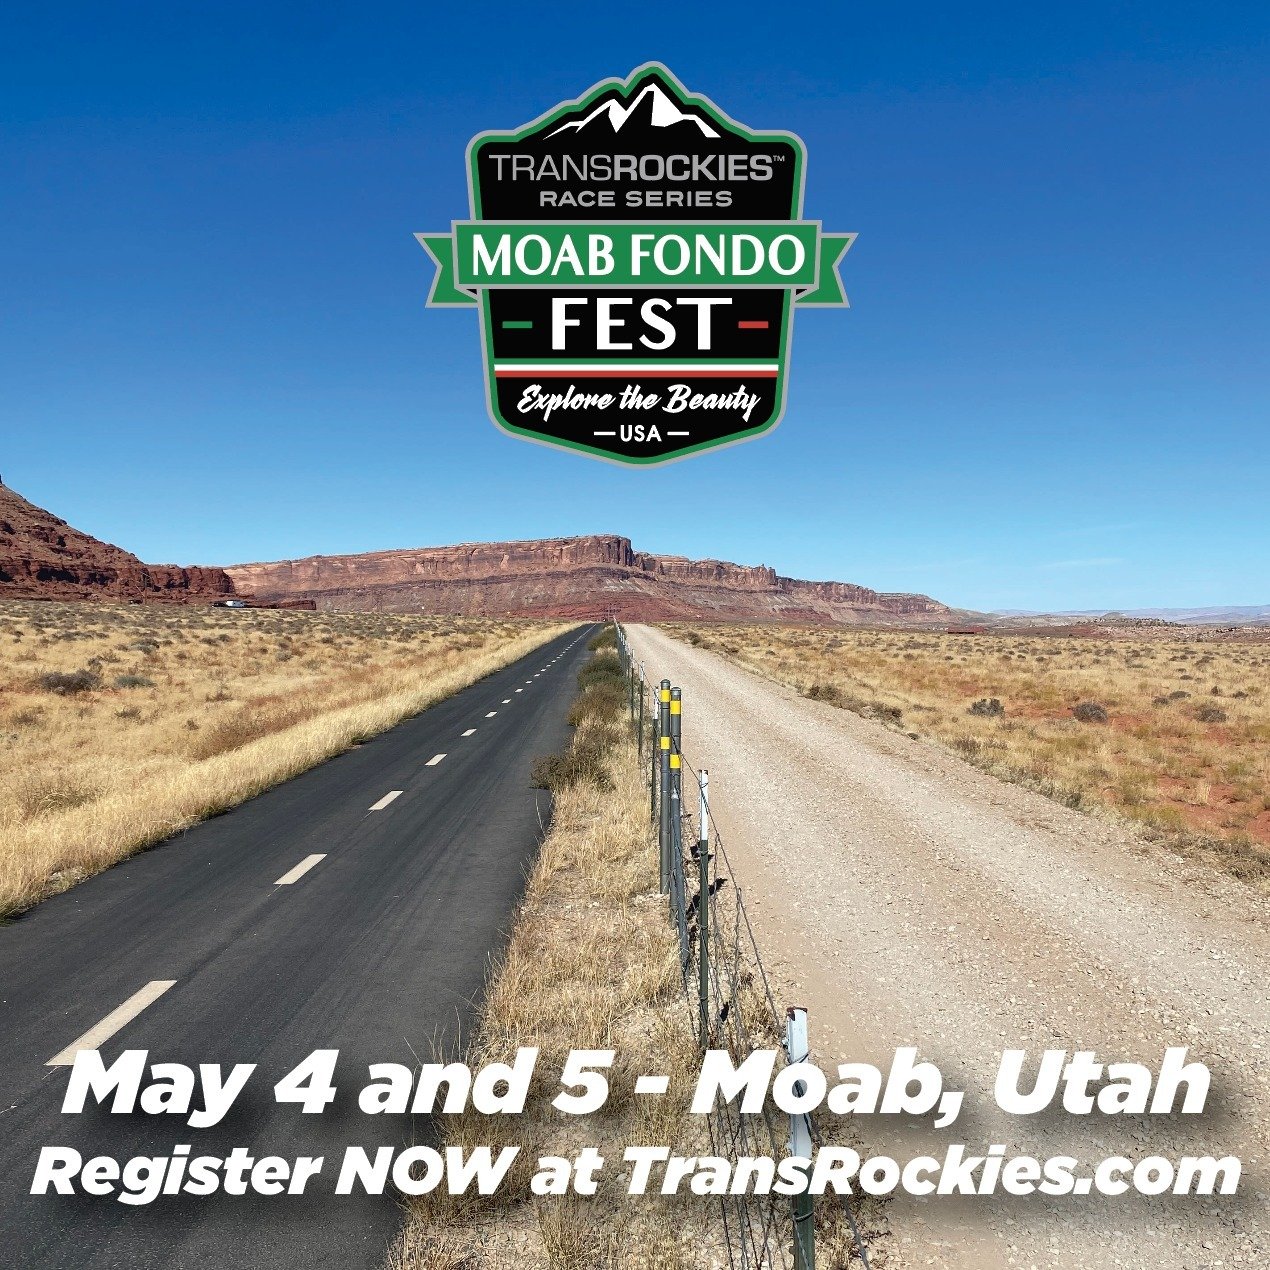 🚨 Early bird spots for Moab Fondo Fest are now SOLD OUT! 🚨⁠
⁠
But don&rsquo;t worry&mdash;you can still register to join us May 4th and 5th in Moab for an unforgettable weekend of road and gravel cycling. Head over to transrockies.com to secure you